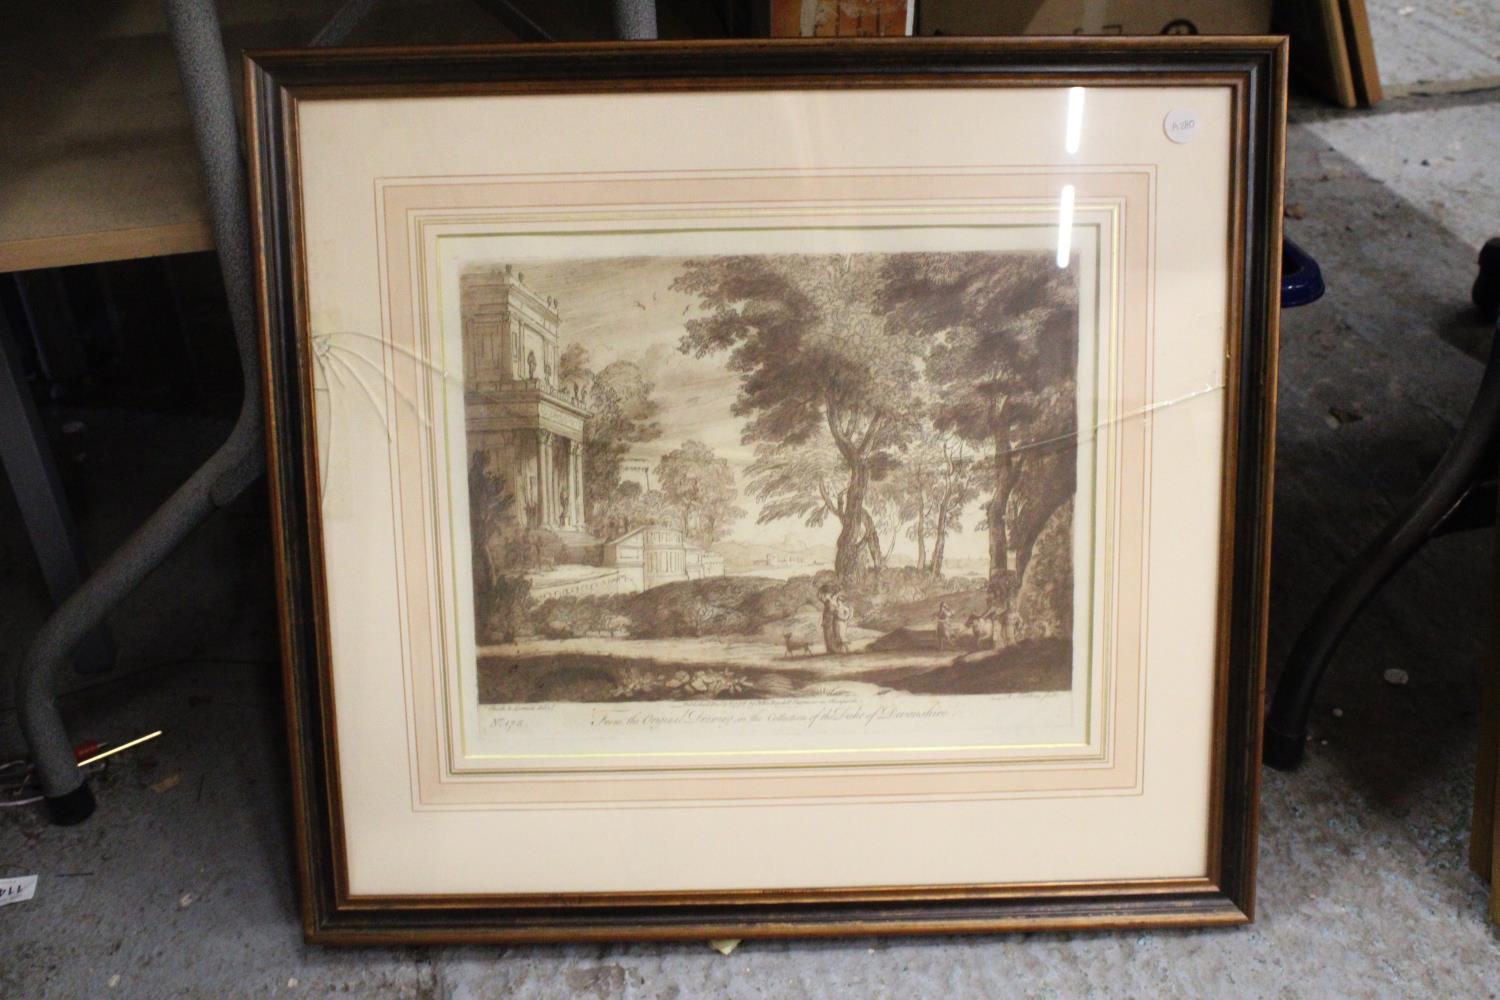 TWO VINTAGE FRAMED PRINTS TAKEN FROM THE ORIGINAL DRAWING, IN THE COLLECTION OF THE DUKE OF - Image 3 of 6